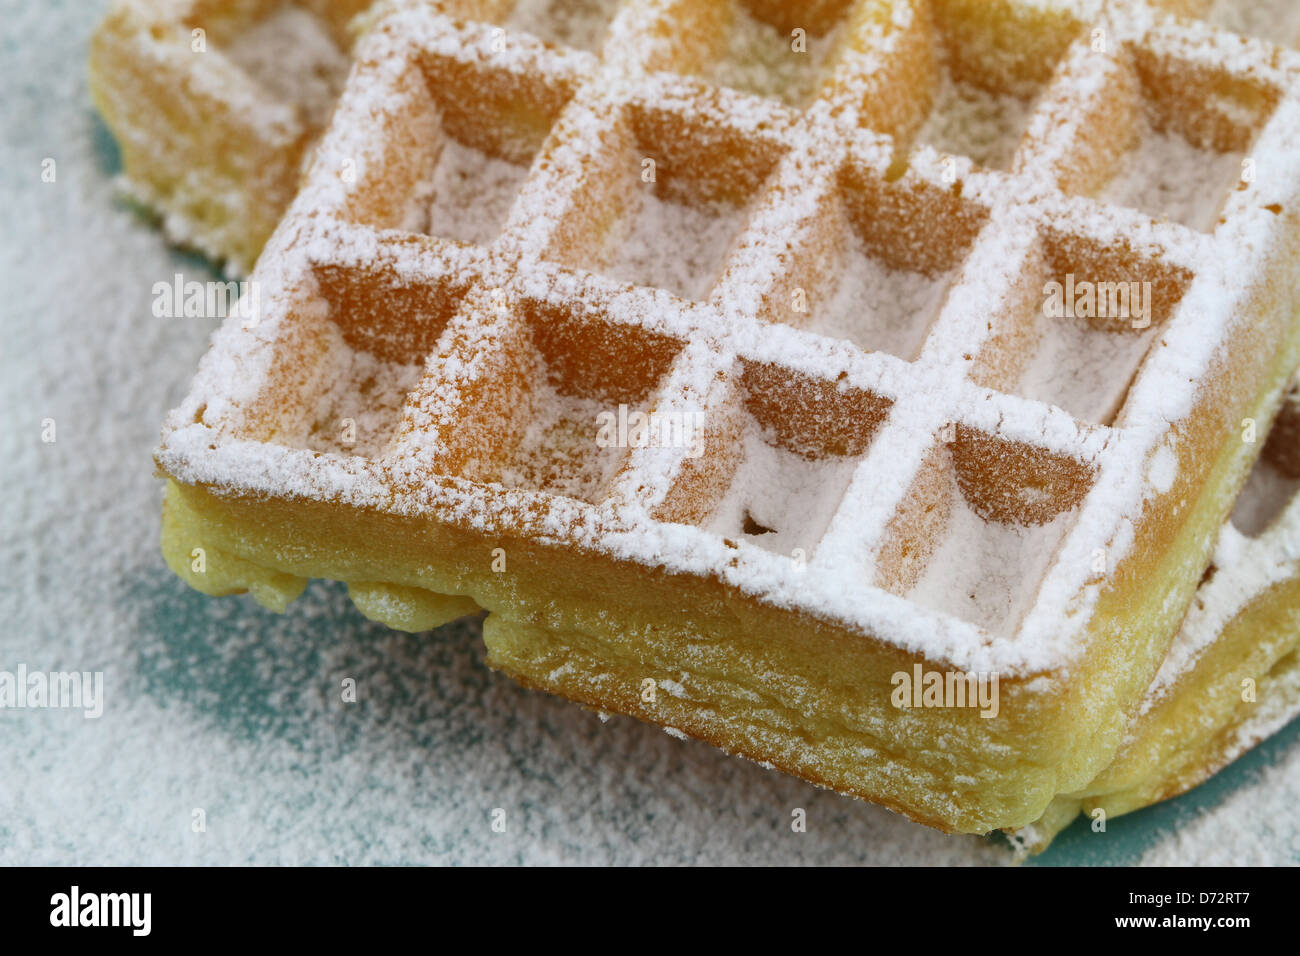 Vanilla wafer dusted with icing sugar, close up Stock Photo